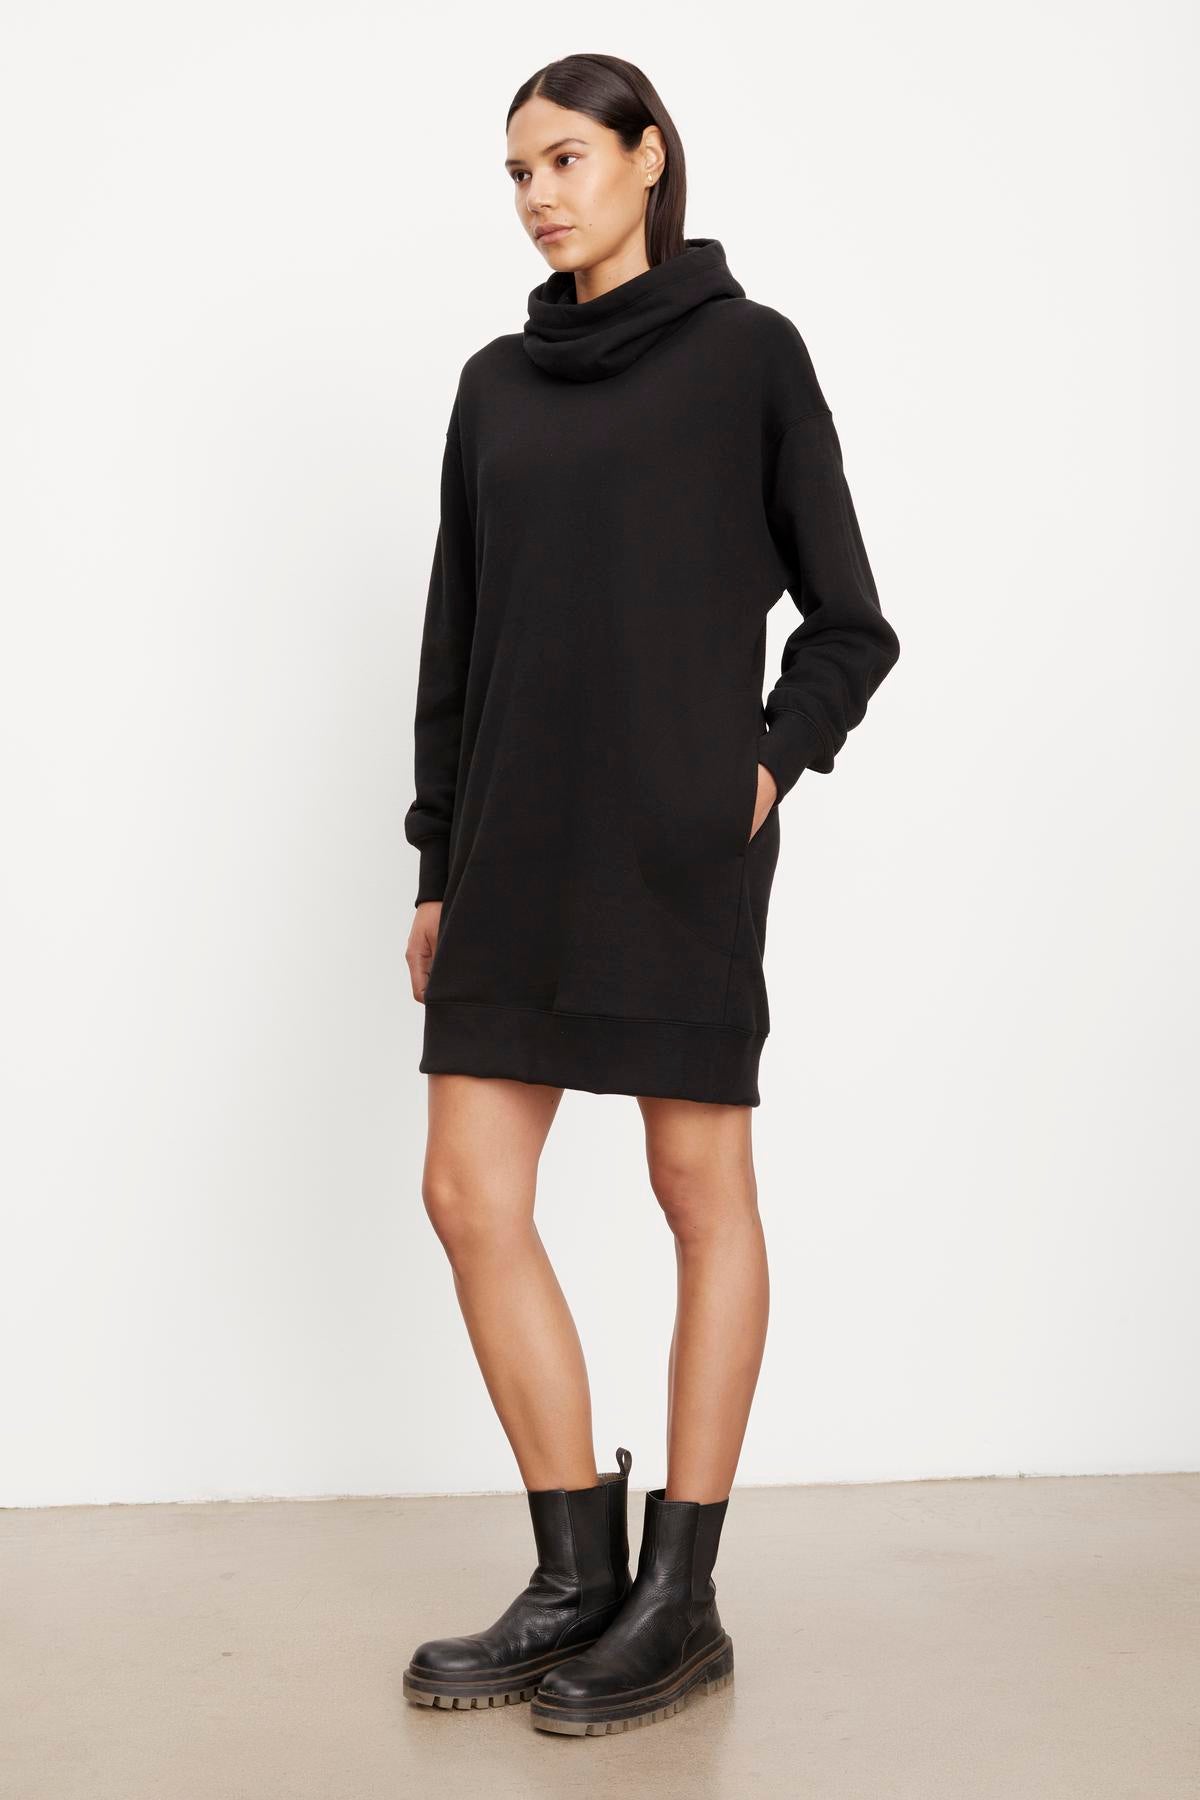   A woman in a black YARA SOFT FLEECE HOODIE DRESS by Velvet by Graham & Spencer and black boots standing against a plain background. 